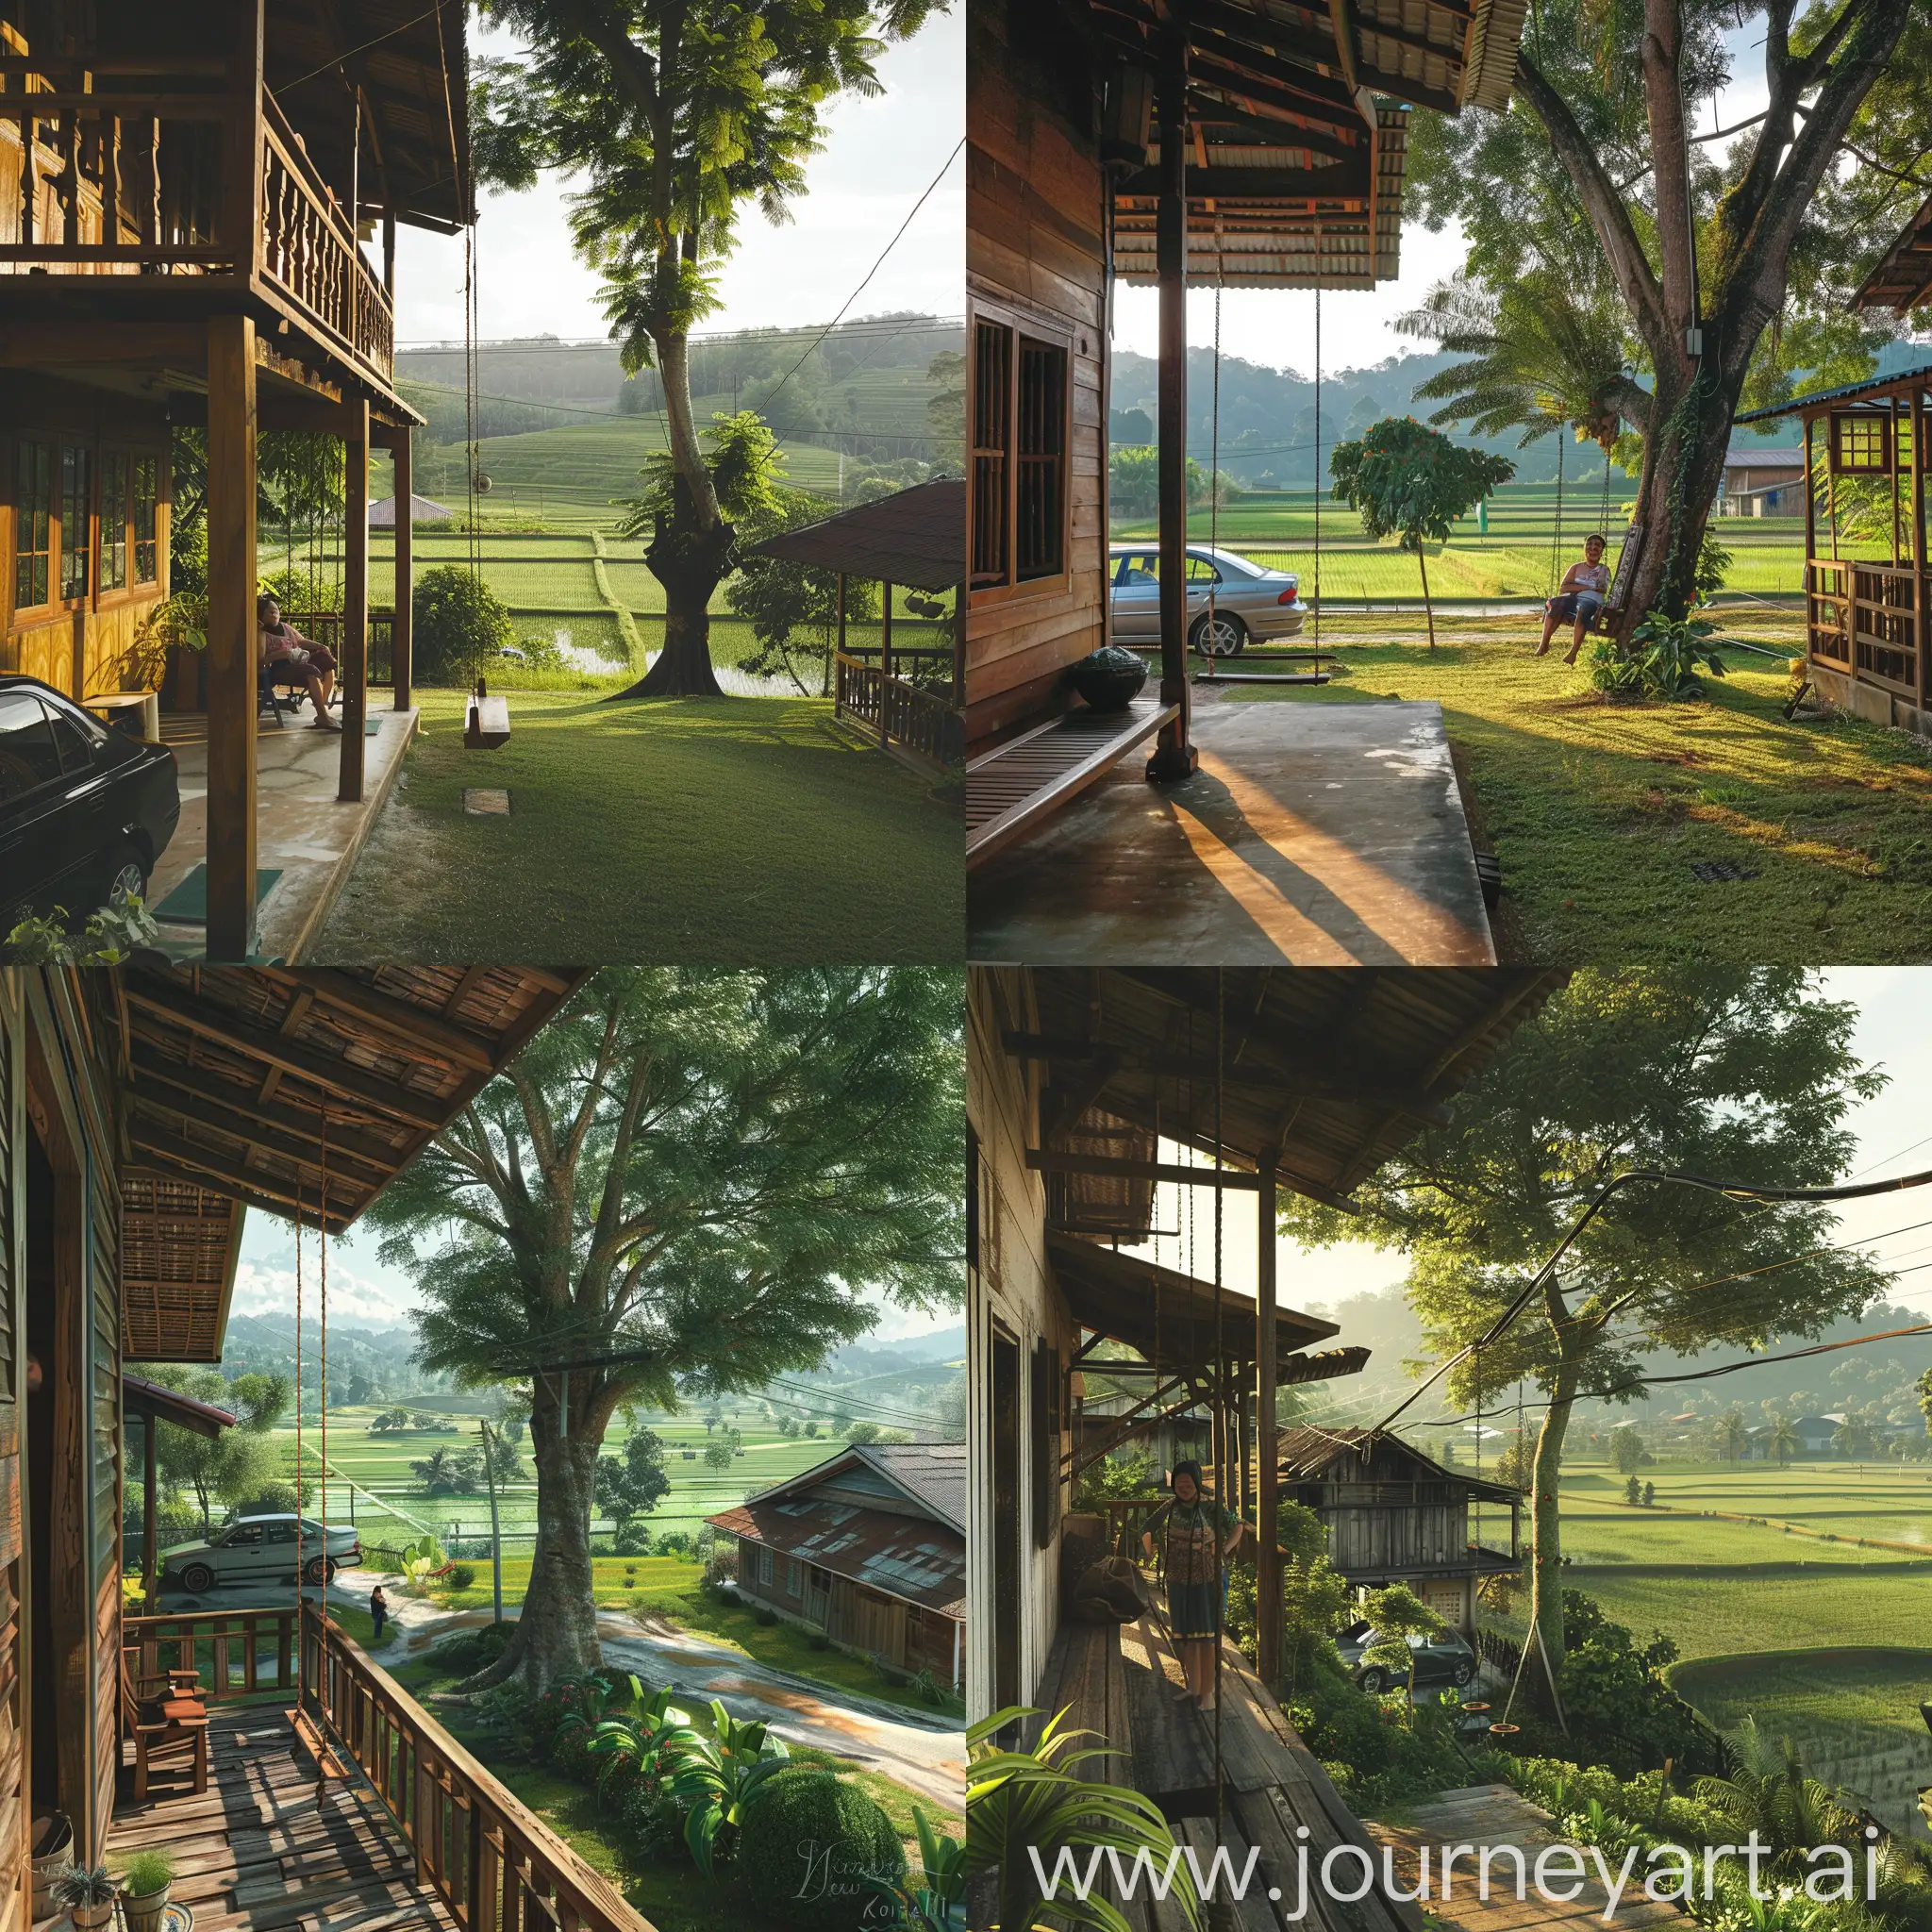 beautiful view from balcony of wooden kampung house in the morning with spacious yard. On the side of the house there is a big shady tree and there is a swing under it. Far from the house you can see rice fields, water lines and ridges bordering rice fields. The green hills are faintly visible with the rays of the beautiful morning sun. Her mom is chatting with the neighbor's aunt. His father's bad car is parked on the left side of the house. realistic, hd uhd